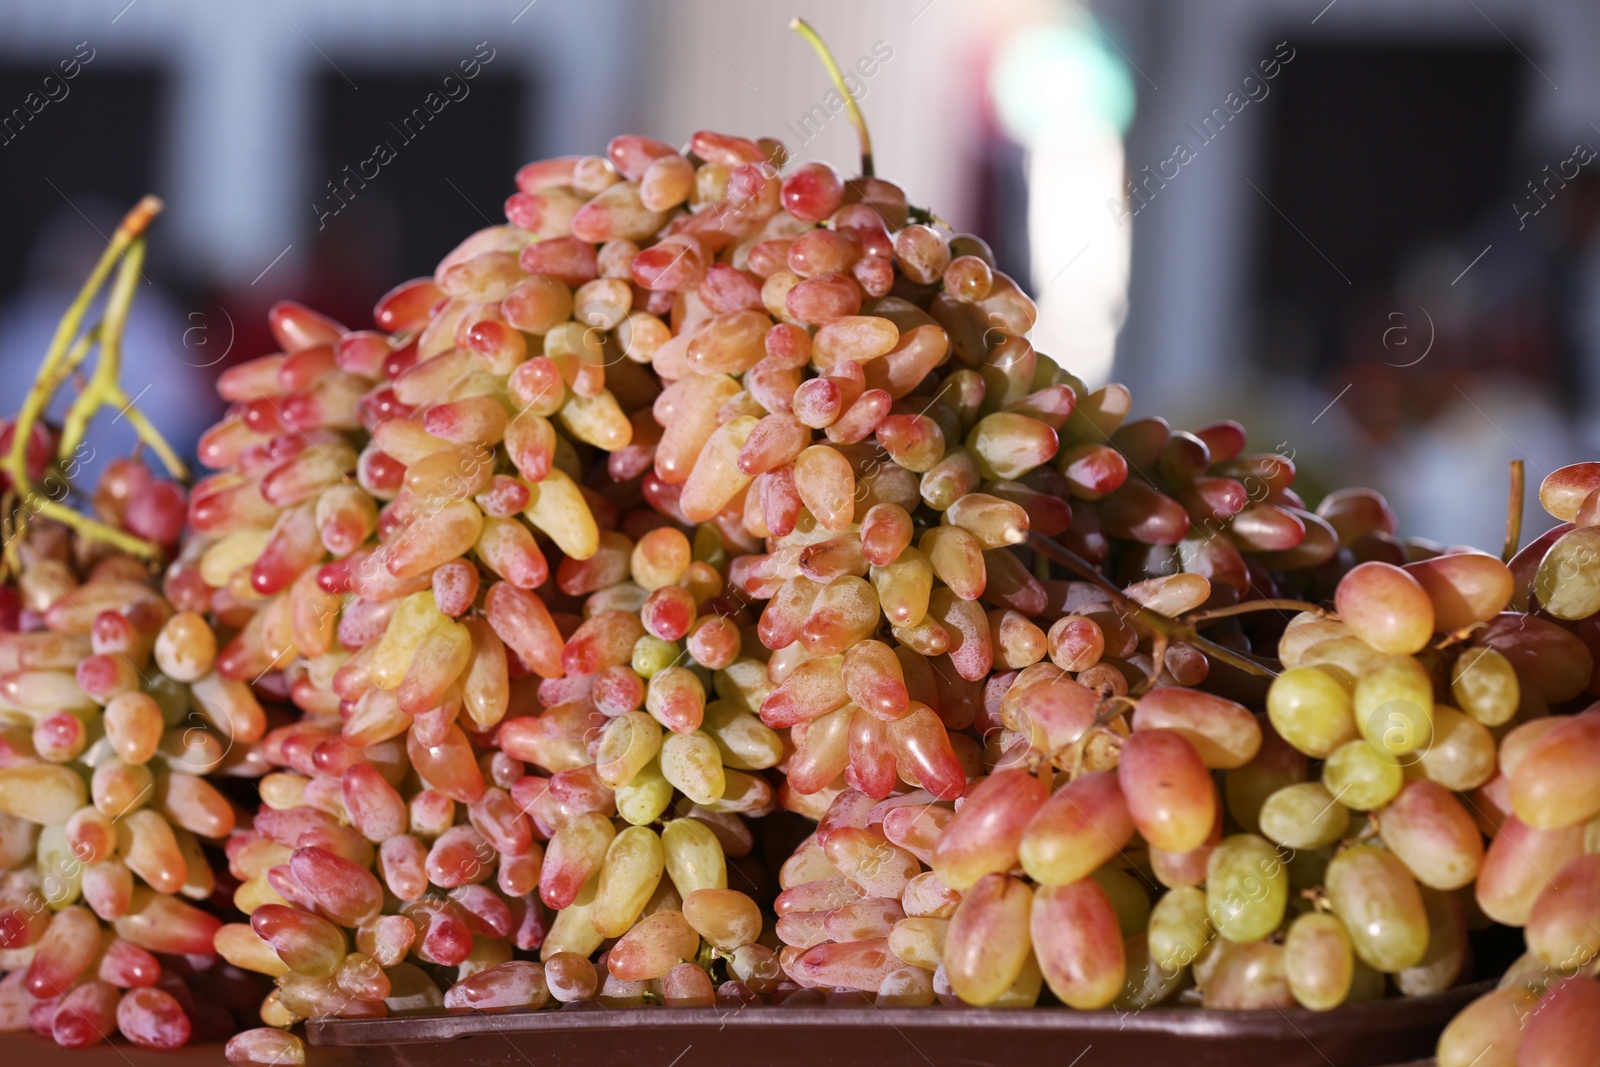 Photo of Fresh ripe juicy grapes on tray against blurred background